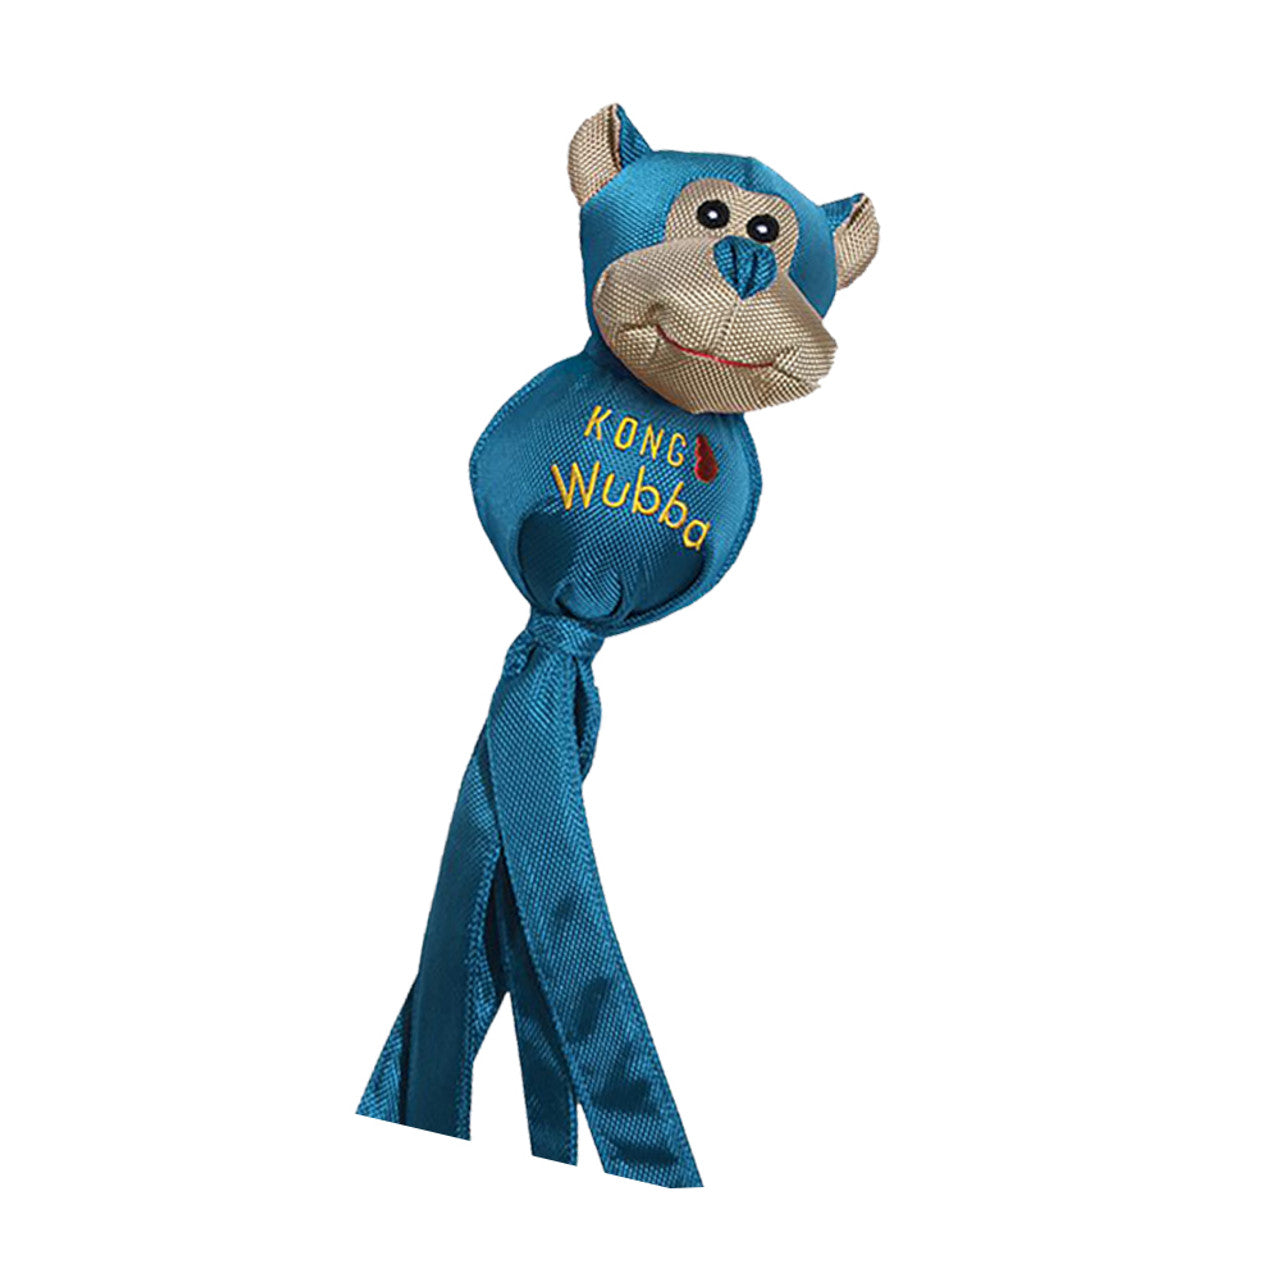 A detailed image of the Kong Wubba Ballistic Friends toy in the shape of a blue monkey, featuring its tough reinforced nylon material, long tails, and playful appearance.